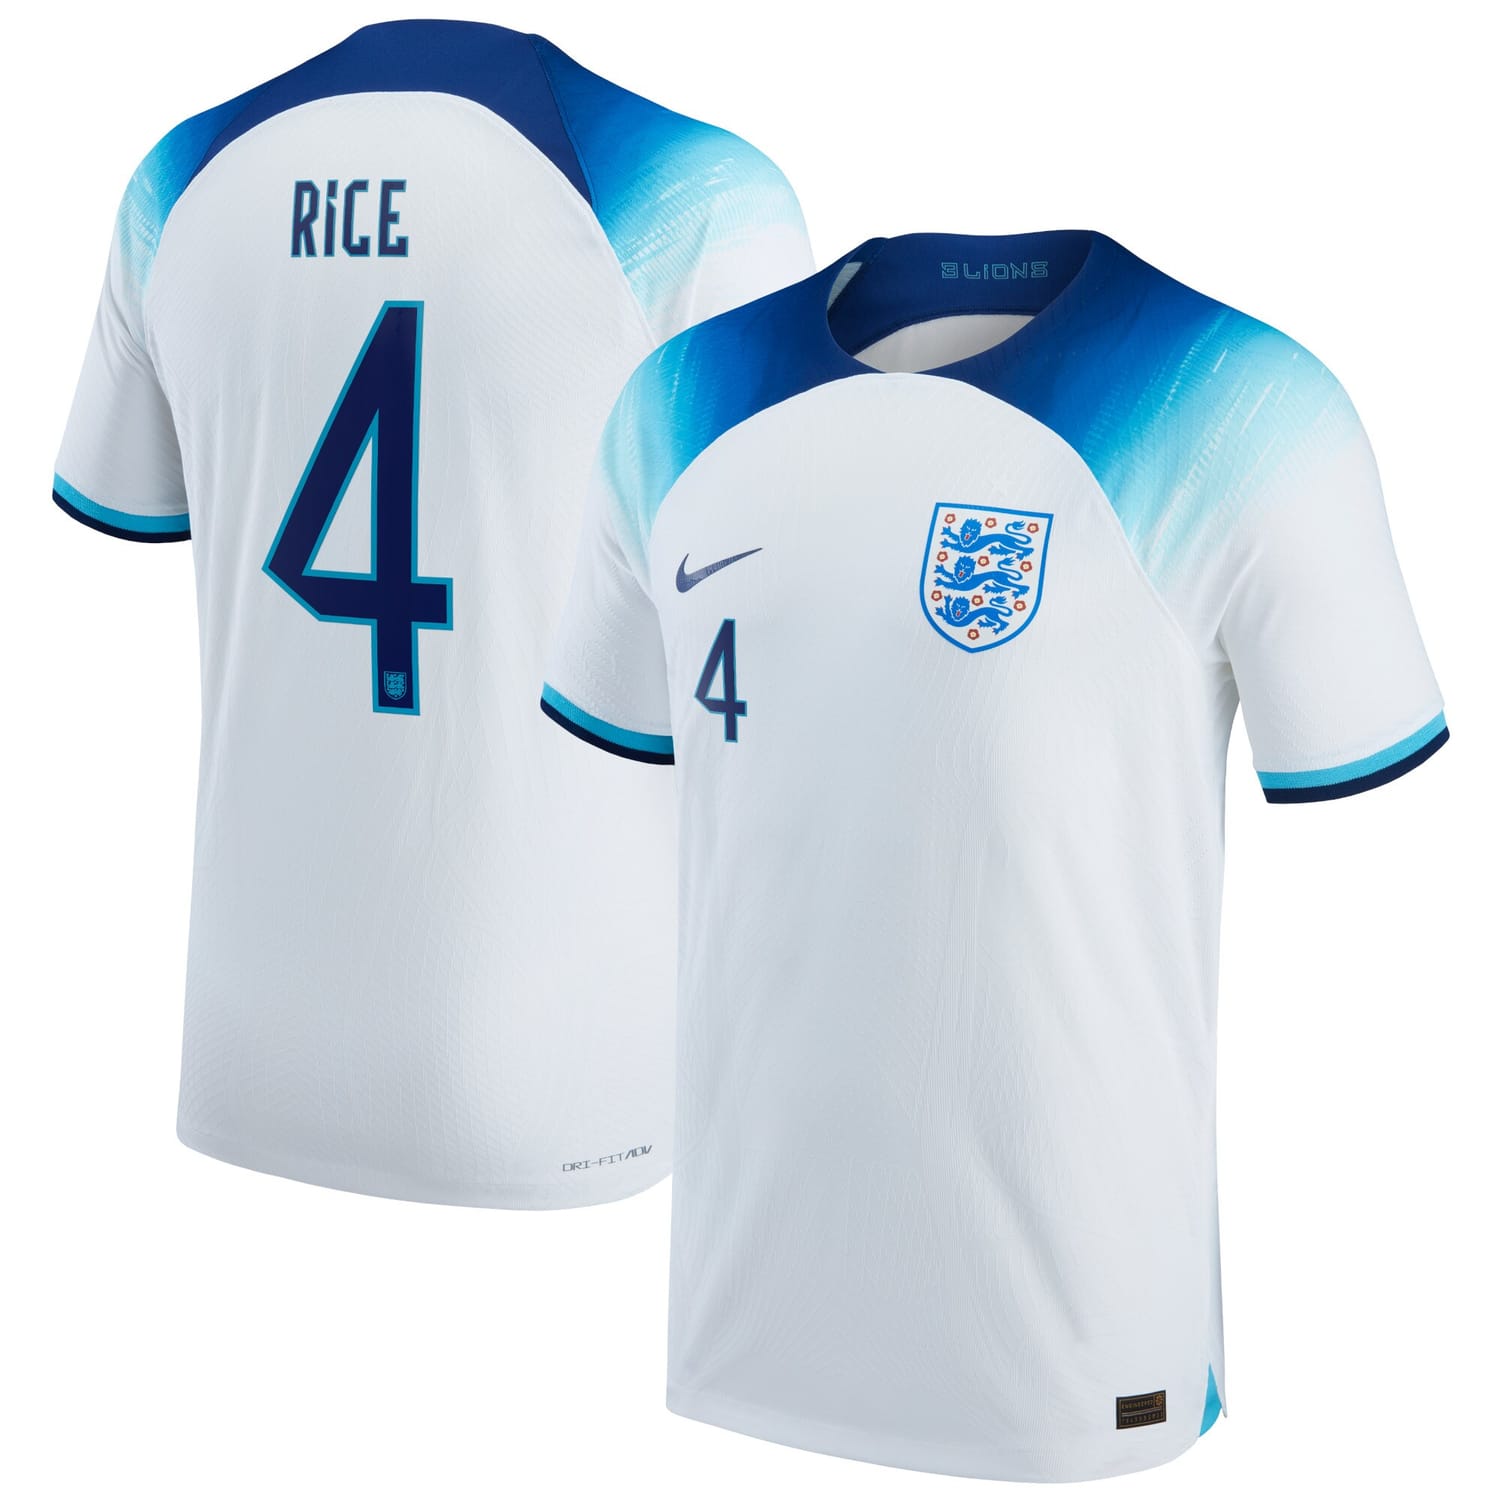 England National Team Home Authentic Jersey Shirt 2022 player Declan Rice 4 printing for Men